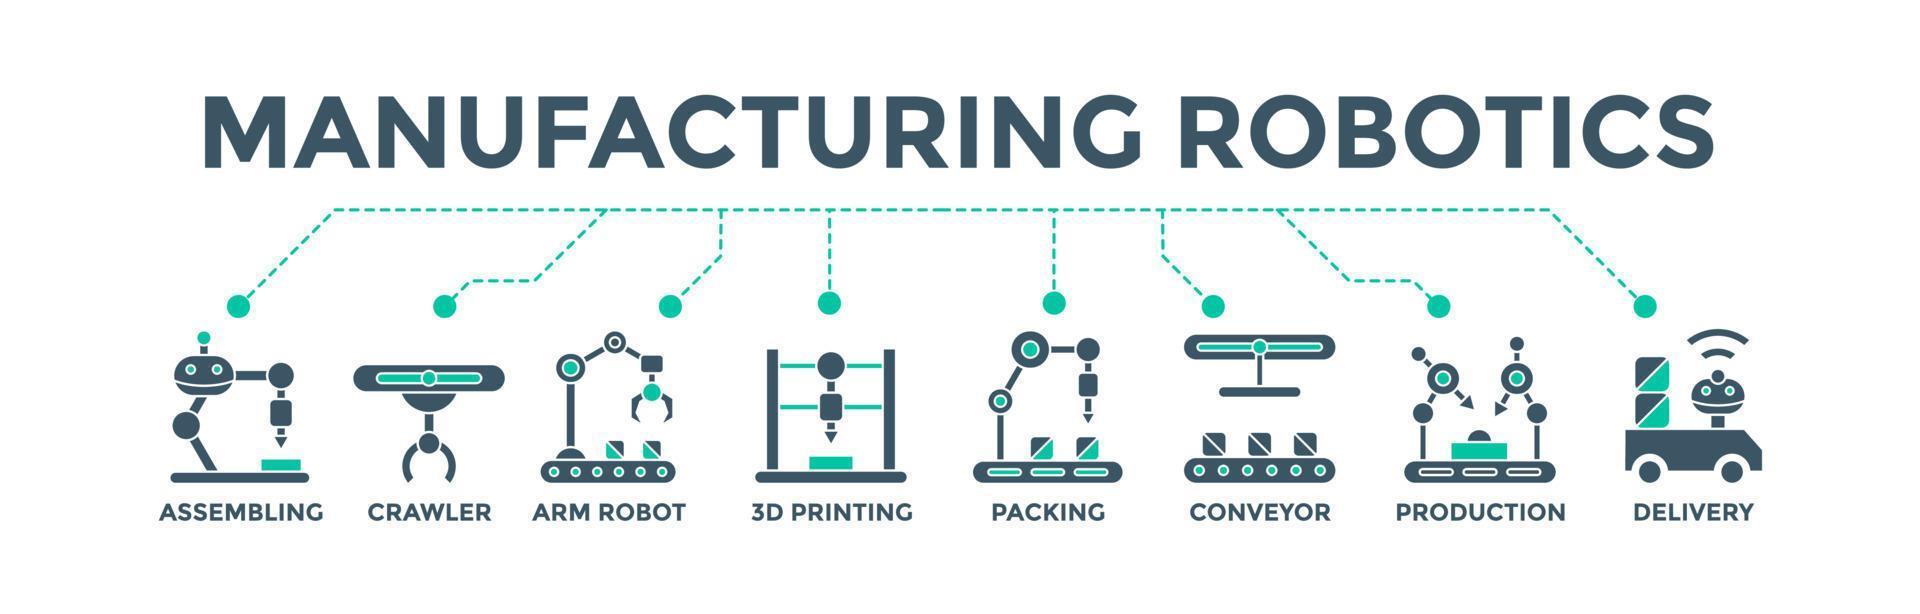 Manufacturing robotics banner web icon vector illustration concept for industrial automation with an icon of assembling, crawler, arm robot, 3d printing, packing conveyor belt, production and delivery